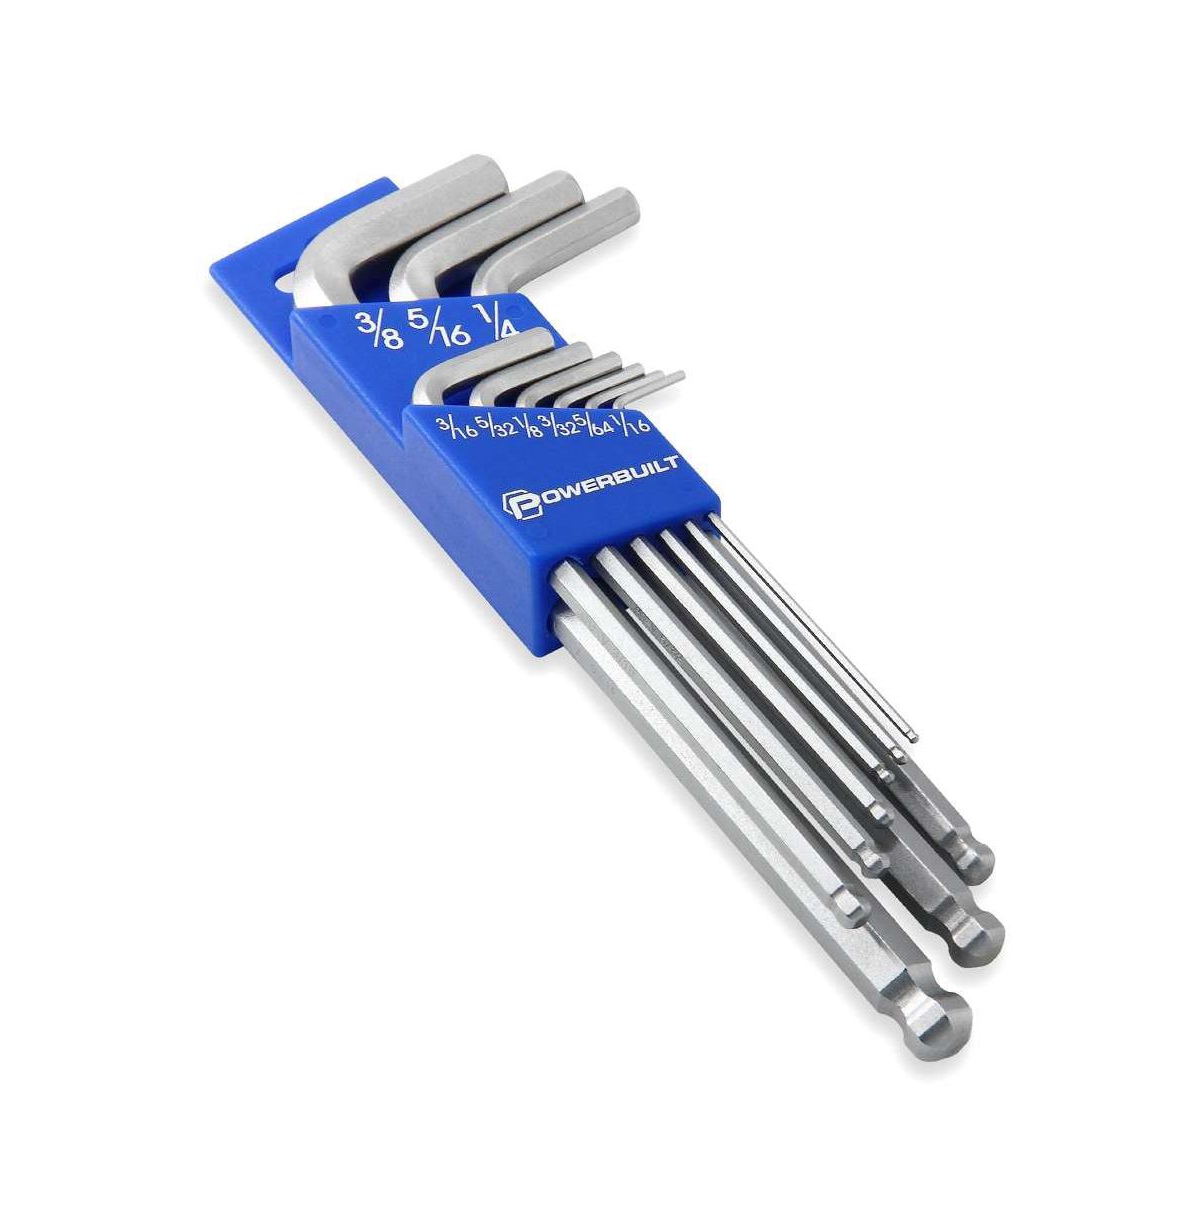 9 Piece Sae Long Arm Hex Key Wrench Set - Silver